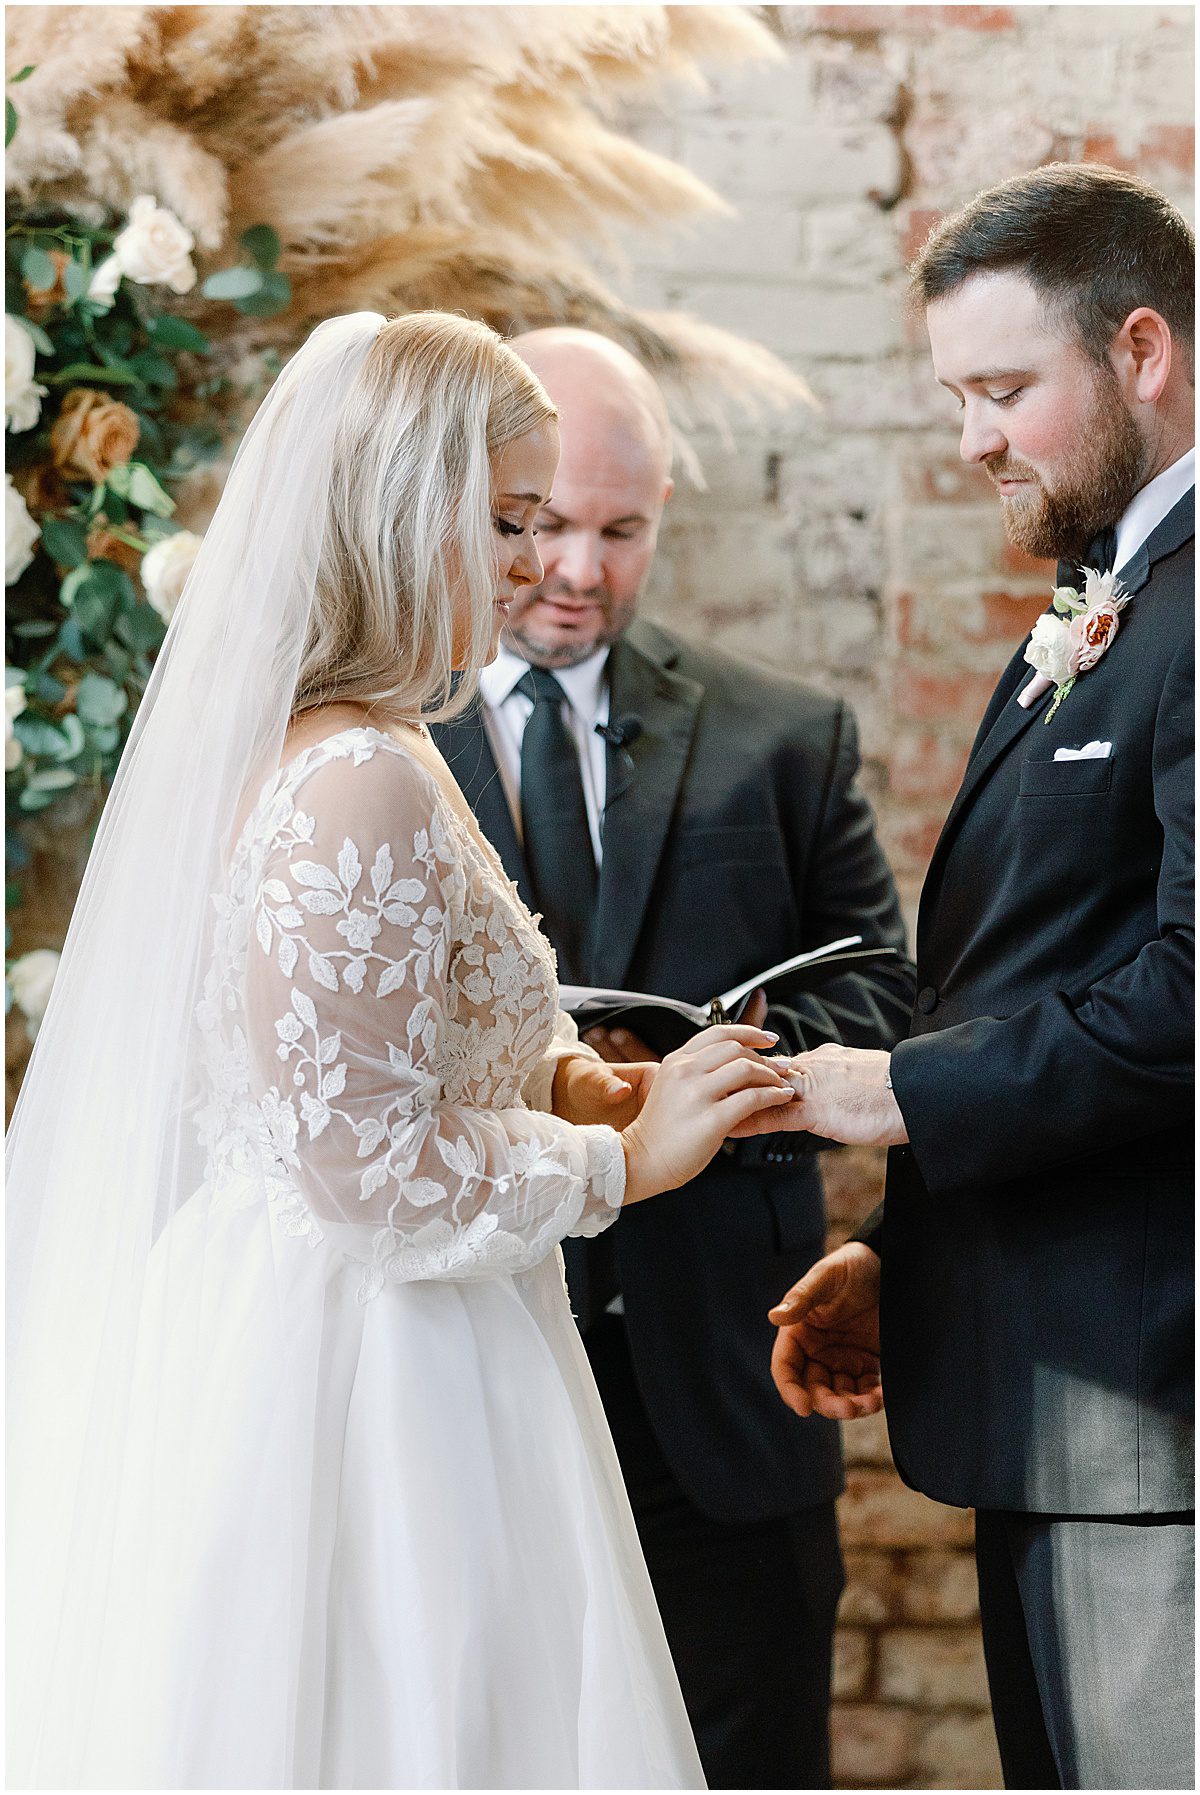 Bride and Groom Giving Rings At Wedding Ceremony Photo